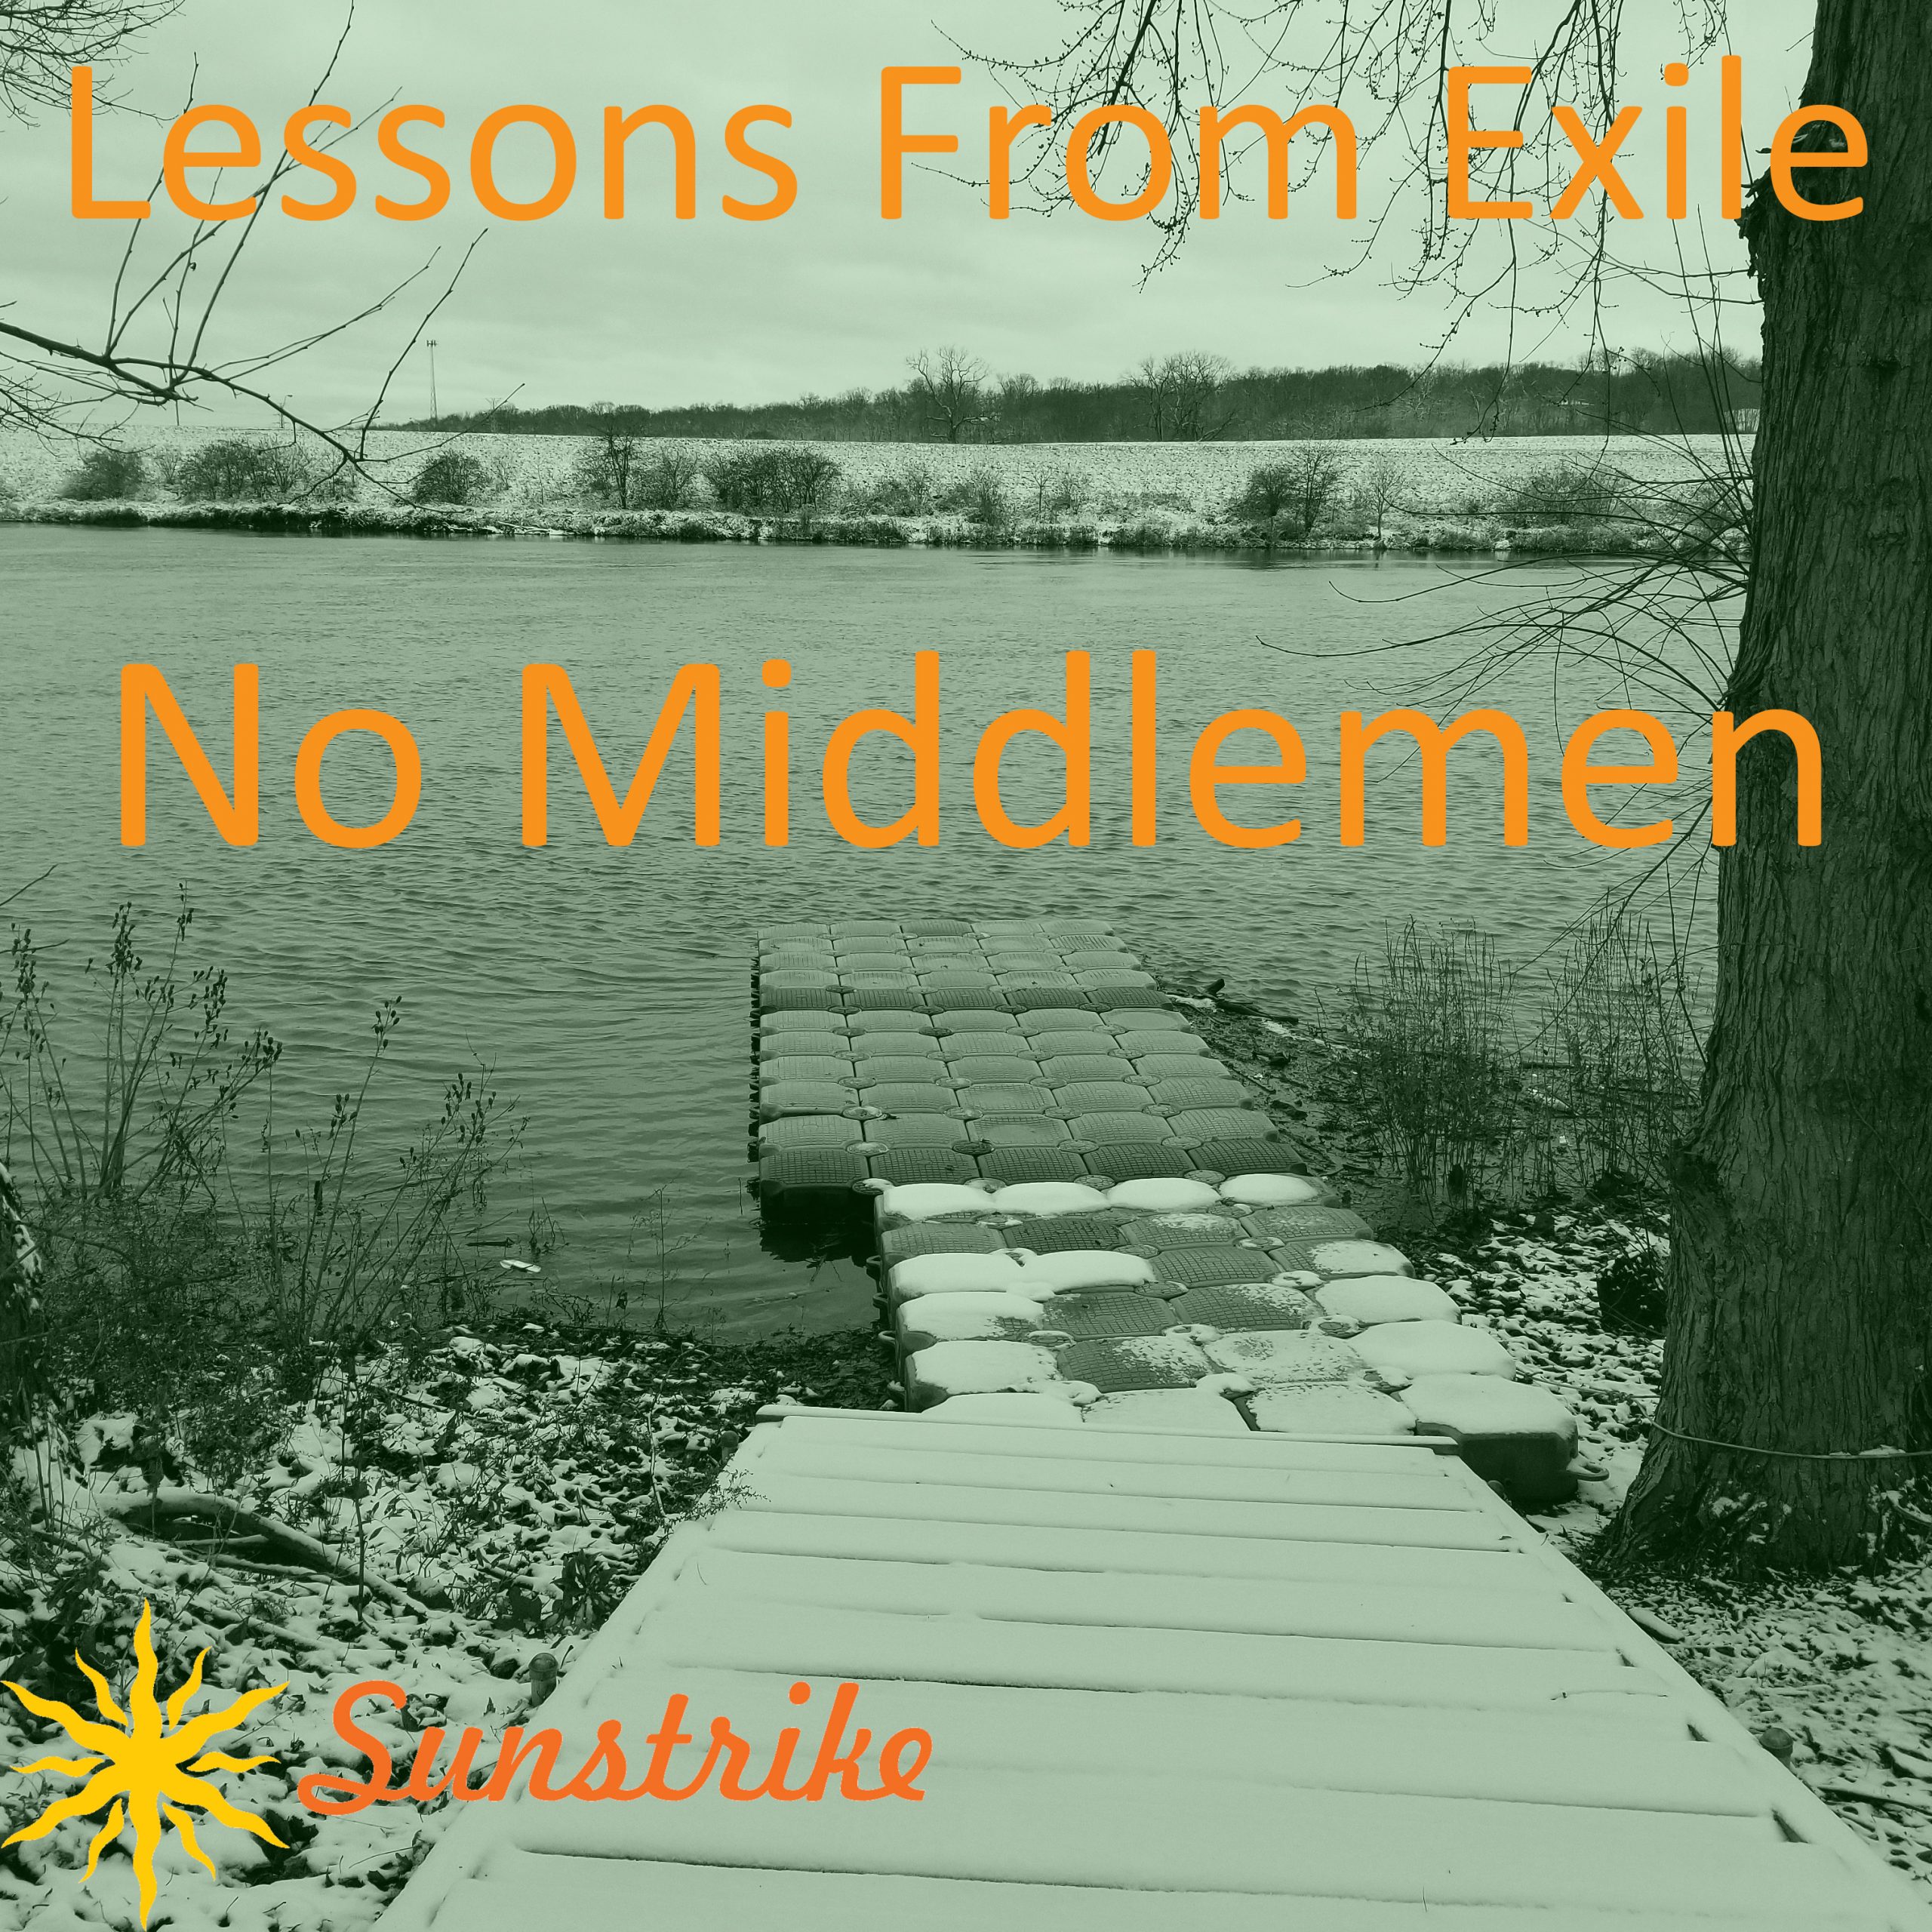 Lessons from Exile #92: No Middlemen